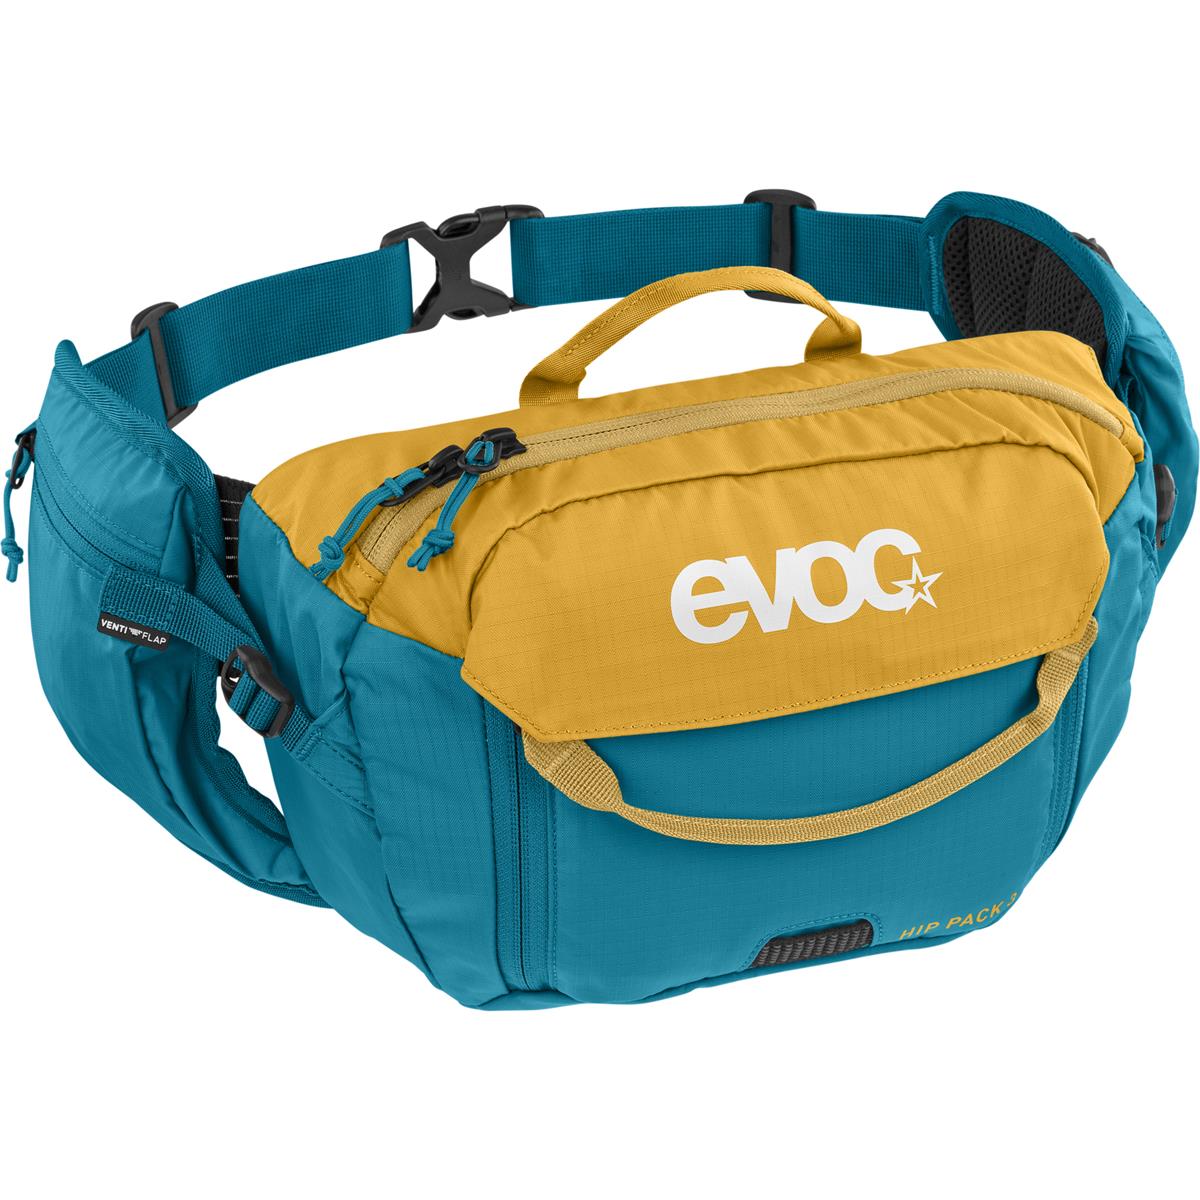 Evoc Hip Pack with Hydration System 1.5 Liters Hip Pack 3 + Ocean Loam